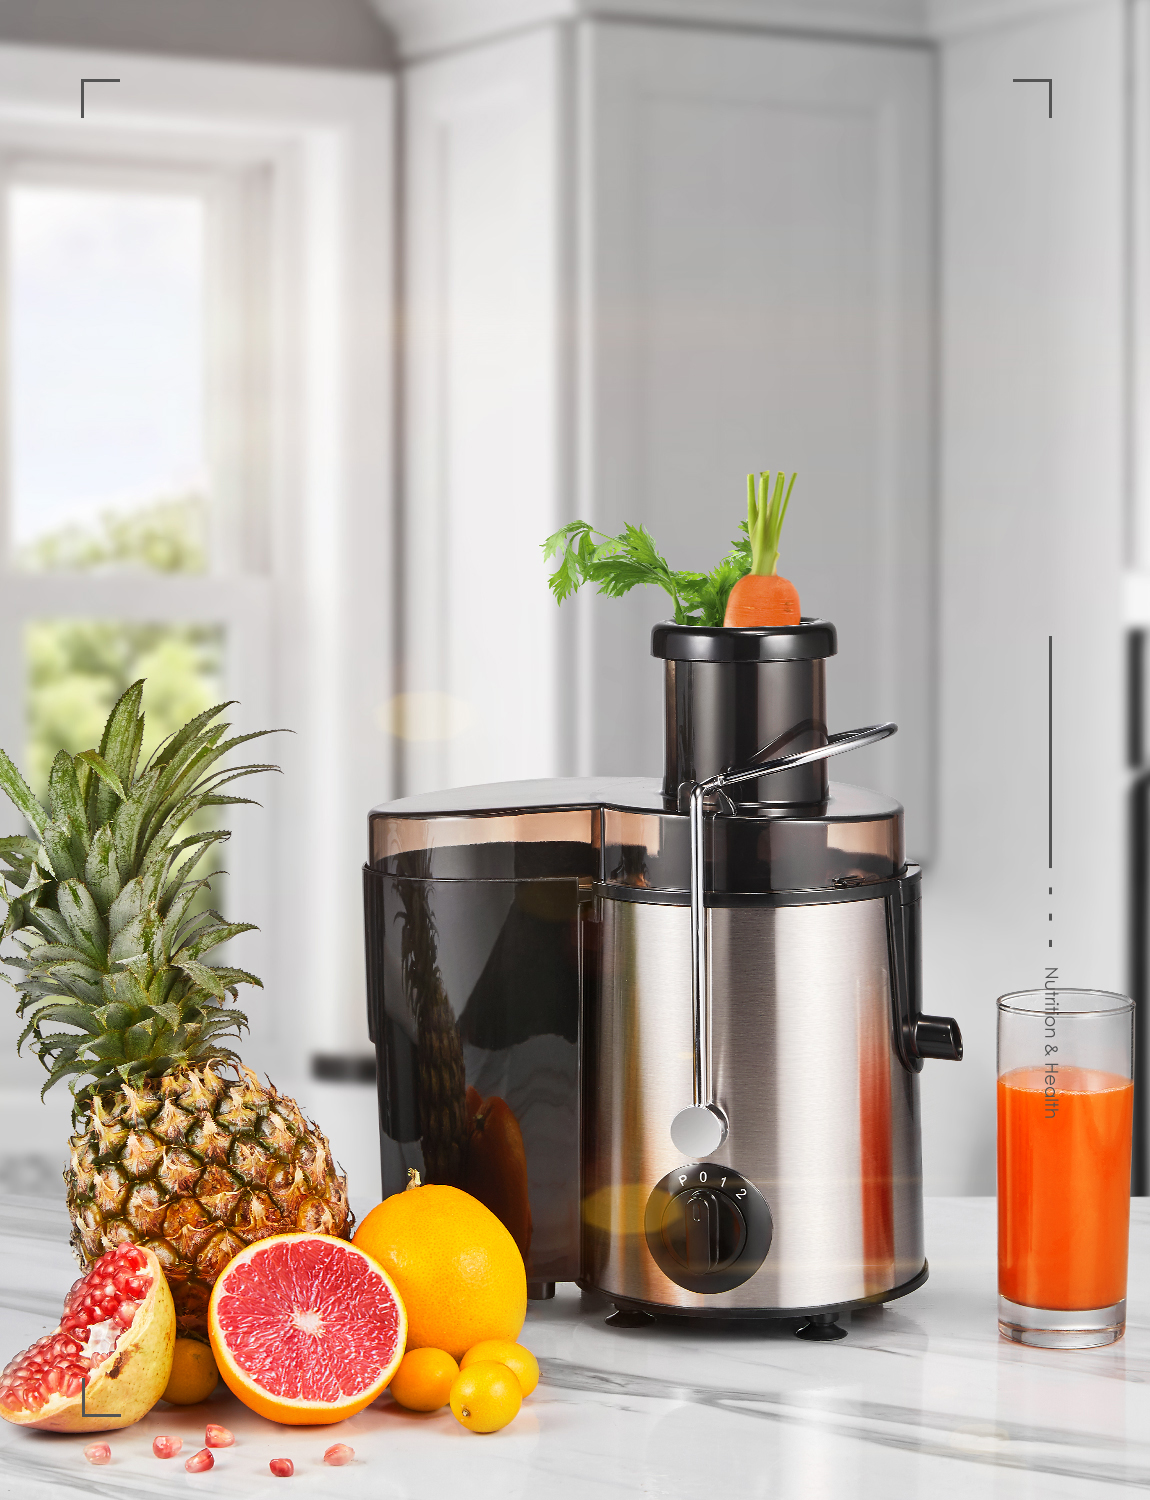 Juicer Centrifugal Juicer Machine Wide 3” Feed Chute Juice Extractor Easy to Clean, Fruit Juicer with Pulse Function and Multi-Speed Control, Anti-Drip, Stainless Steel BPA-Free - image 5 of 12